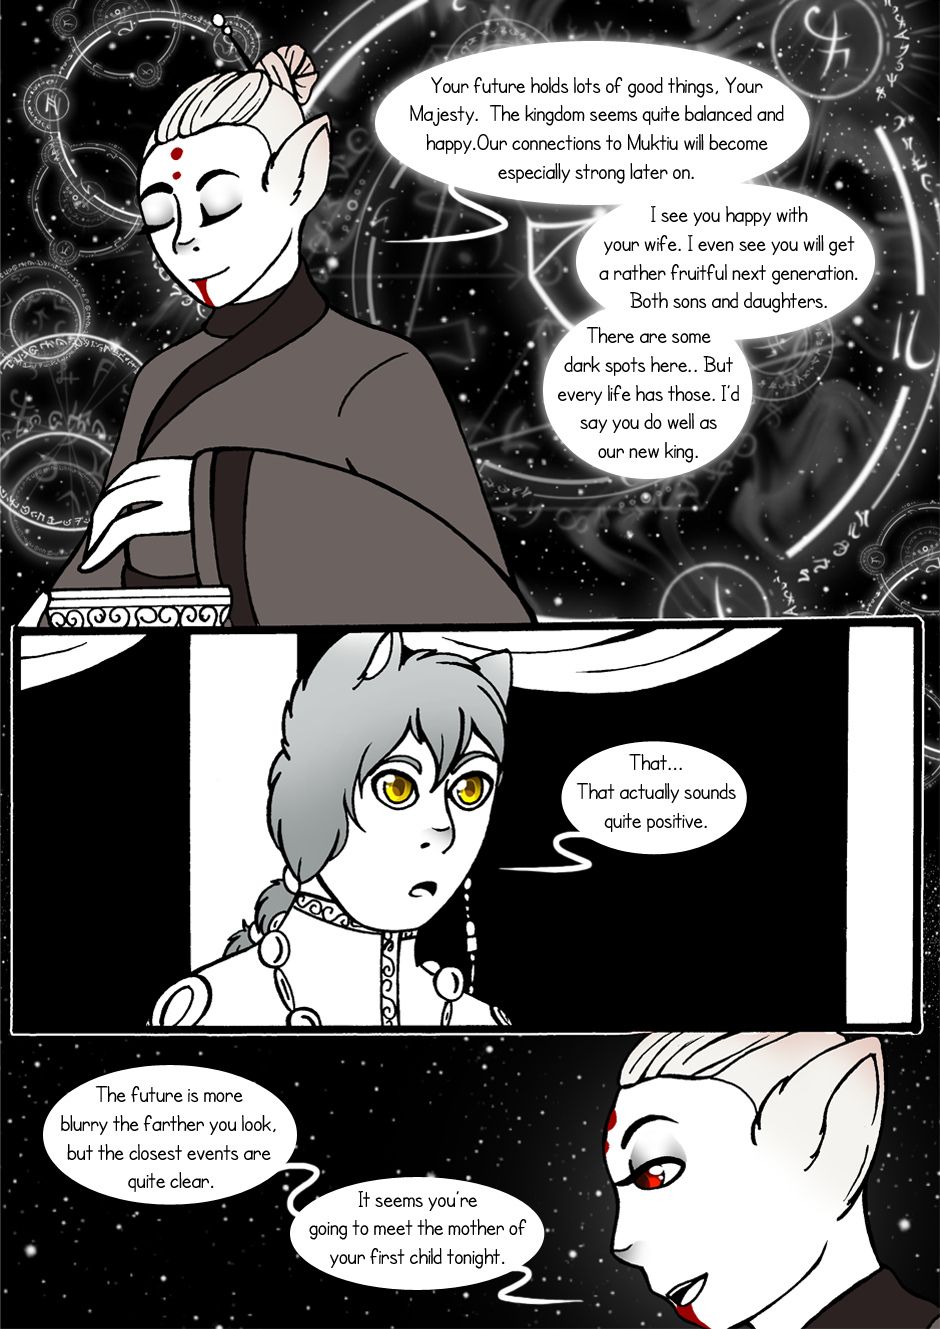 [Jeny-jen94] Between Kings and Queens [Ongoing] 27